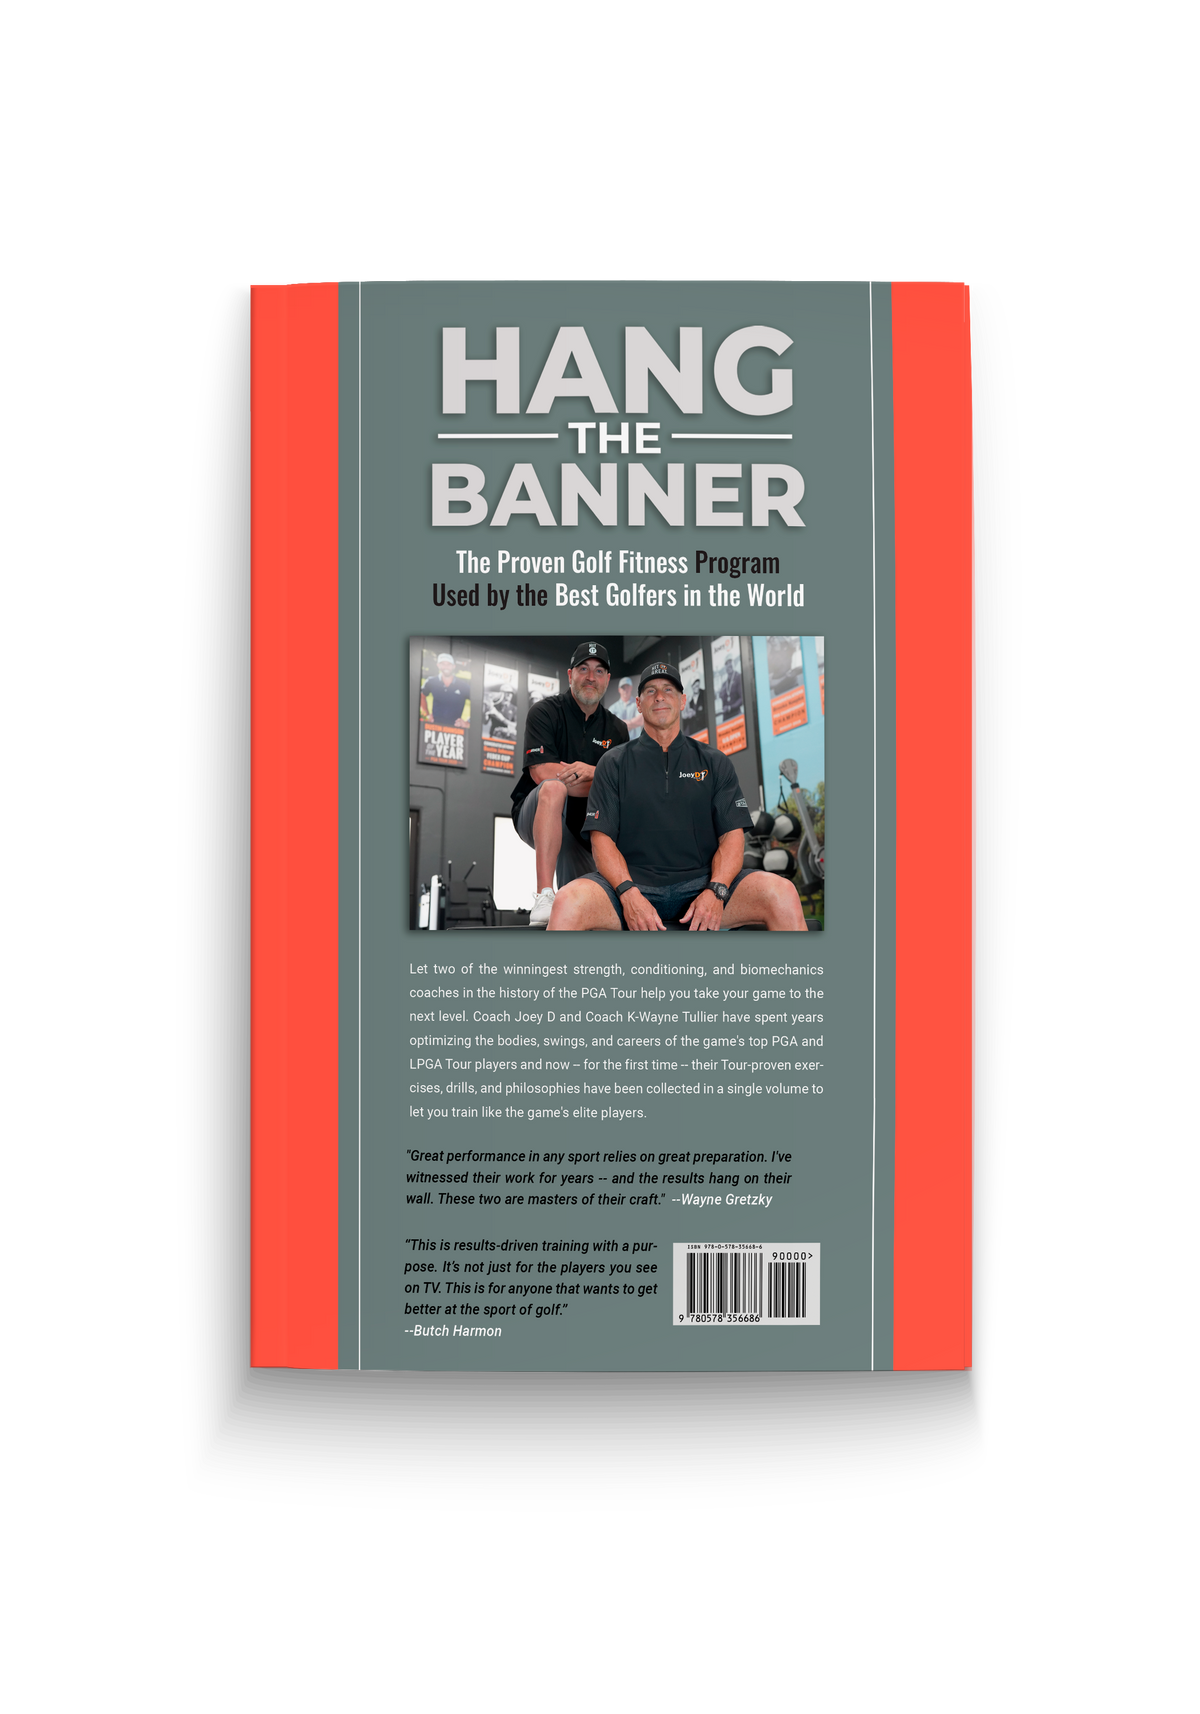 Hang The Banner - Hardcover